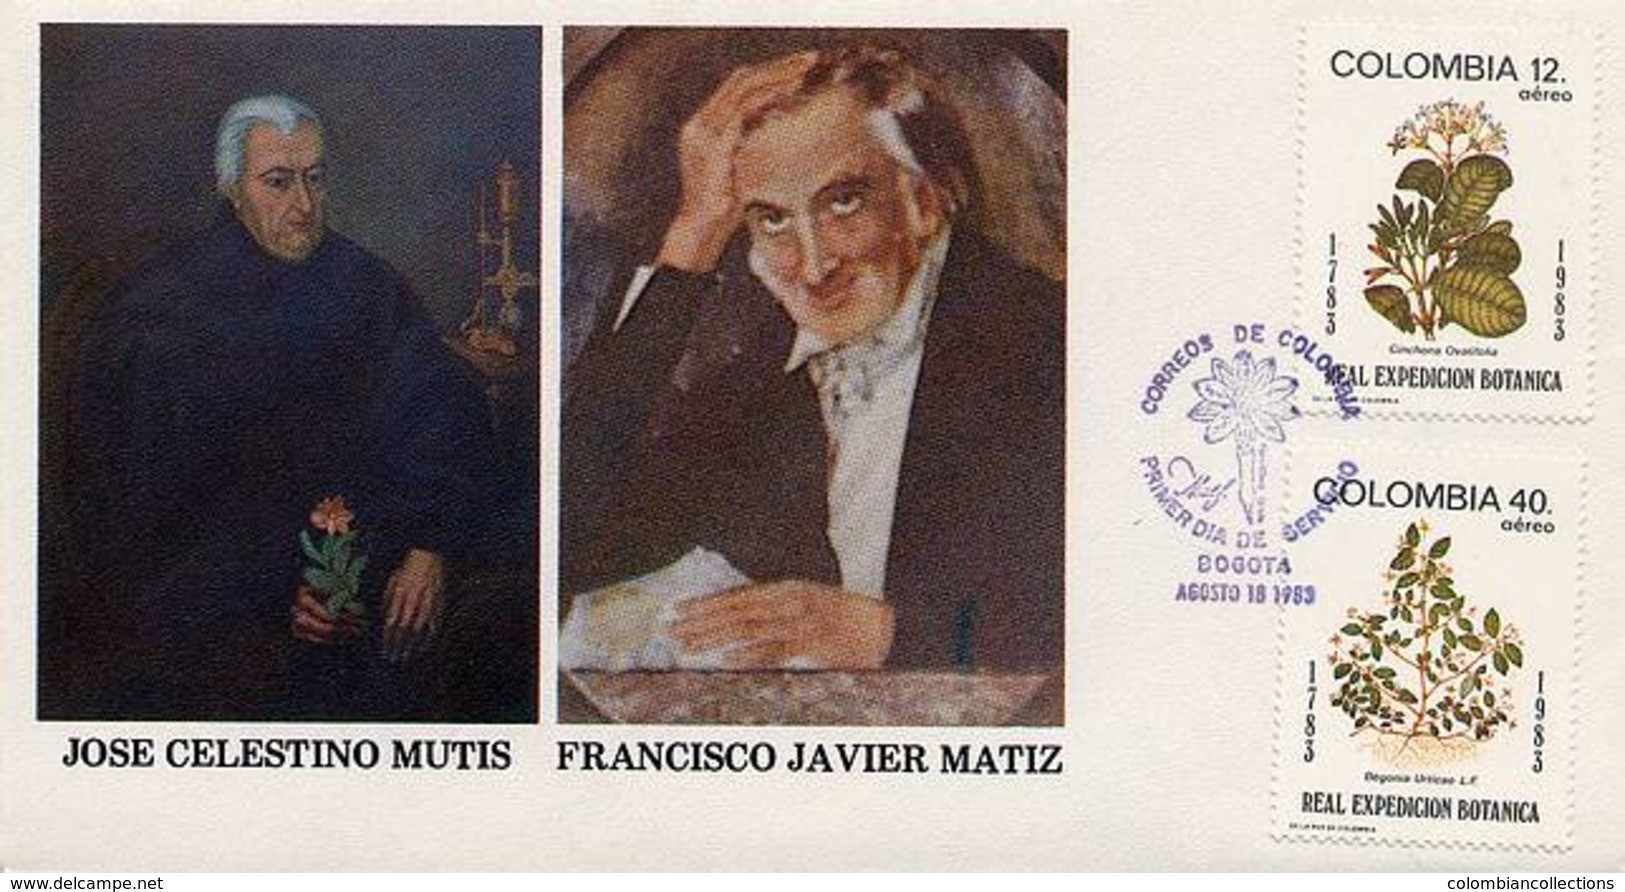 Lote 1642-4F, Colombia,1983, SPD-FDC, 200 Años Expedicion Botanica, Botanical Expedition, Flower, Mutis - Colombia